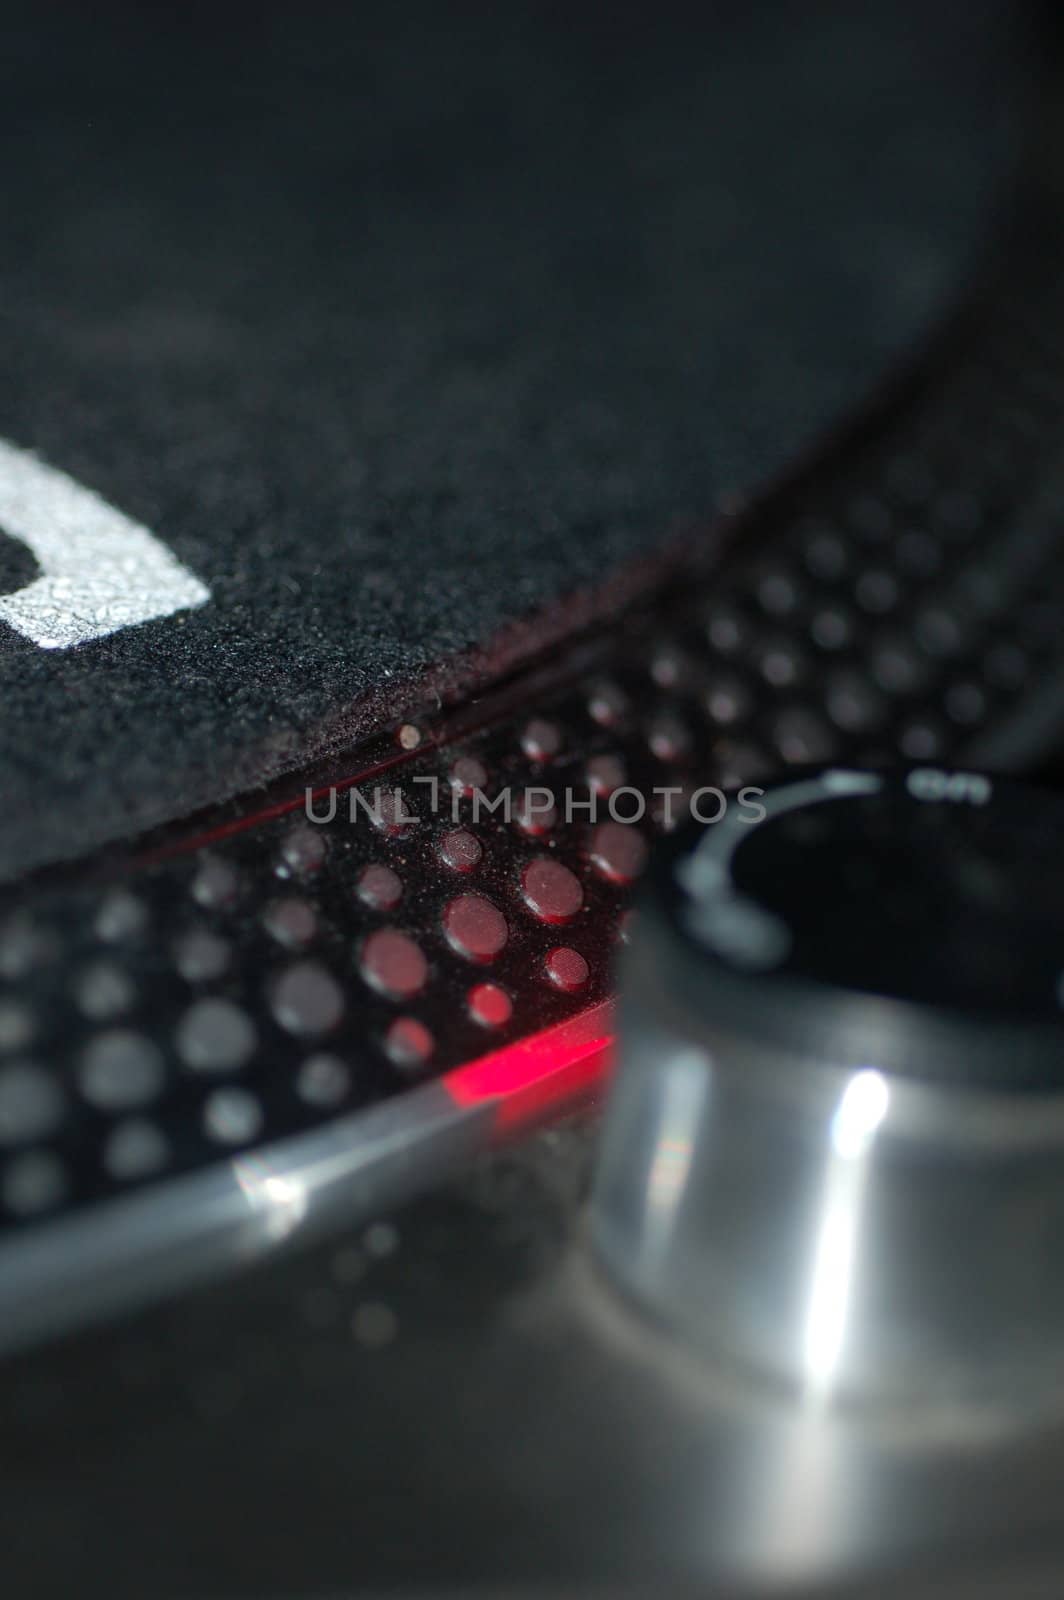 Edge of a turntable in a nightclub